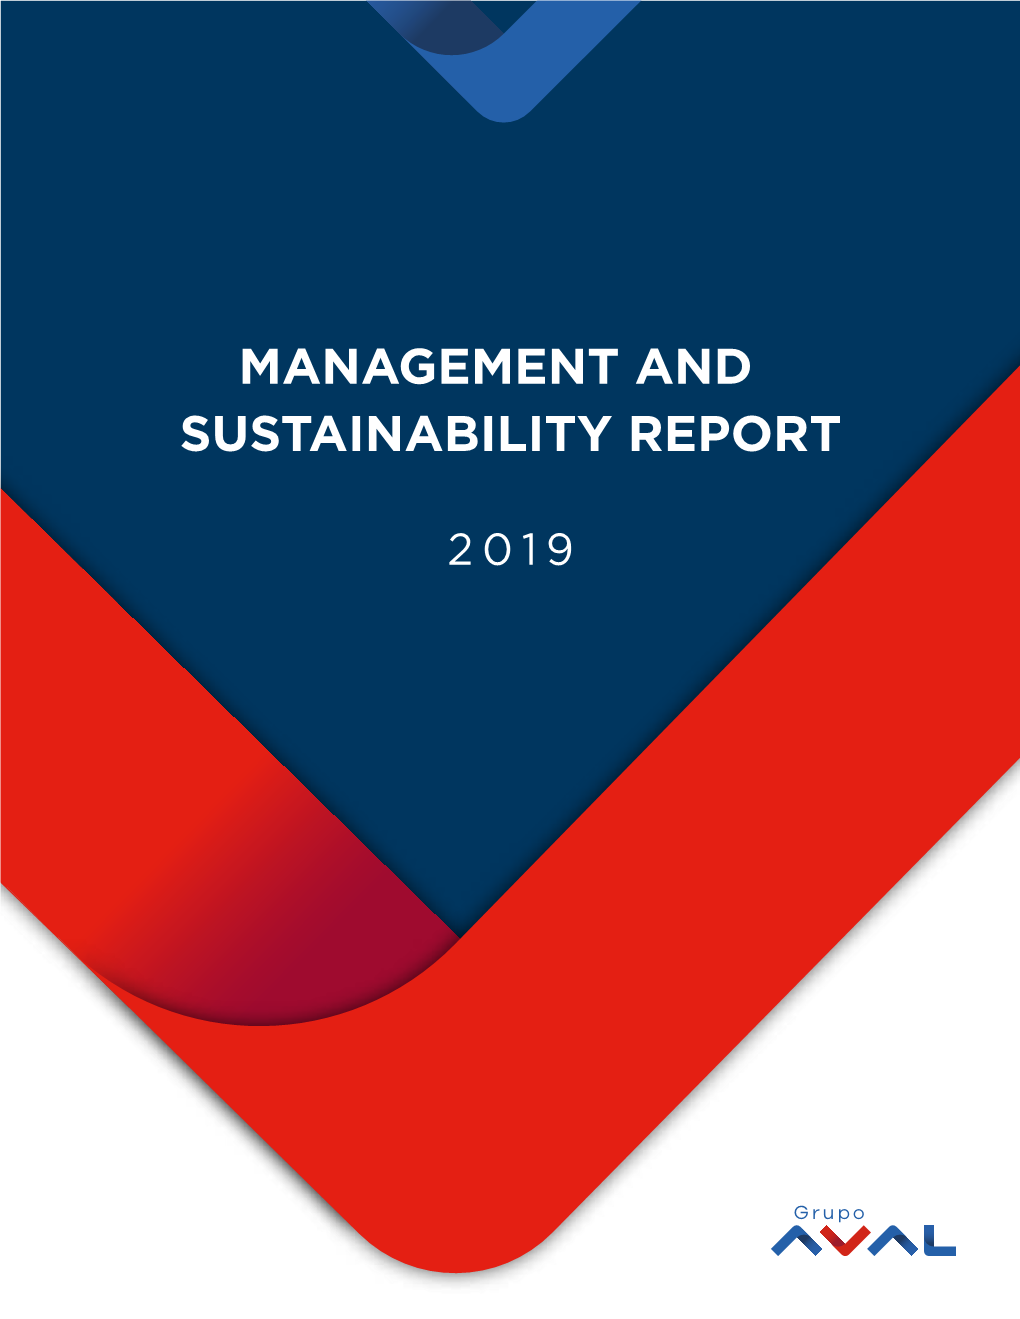 Management and Sustainability Report 2019